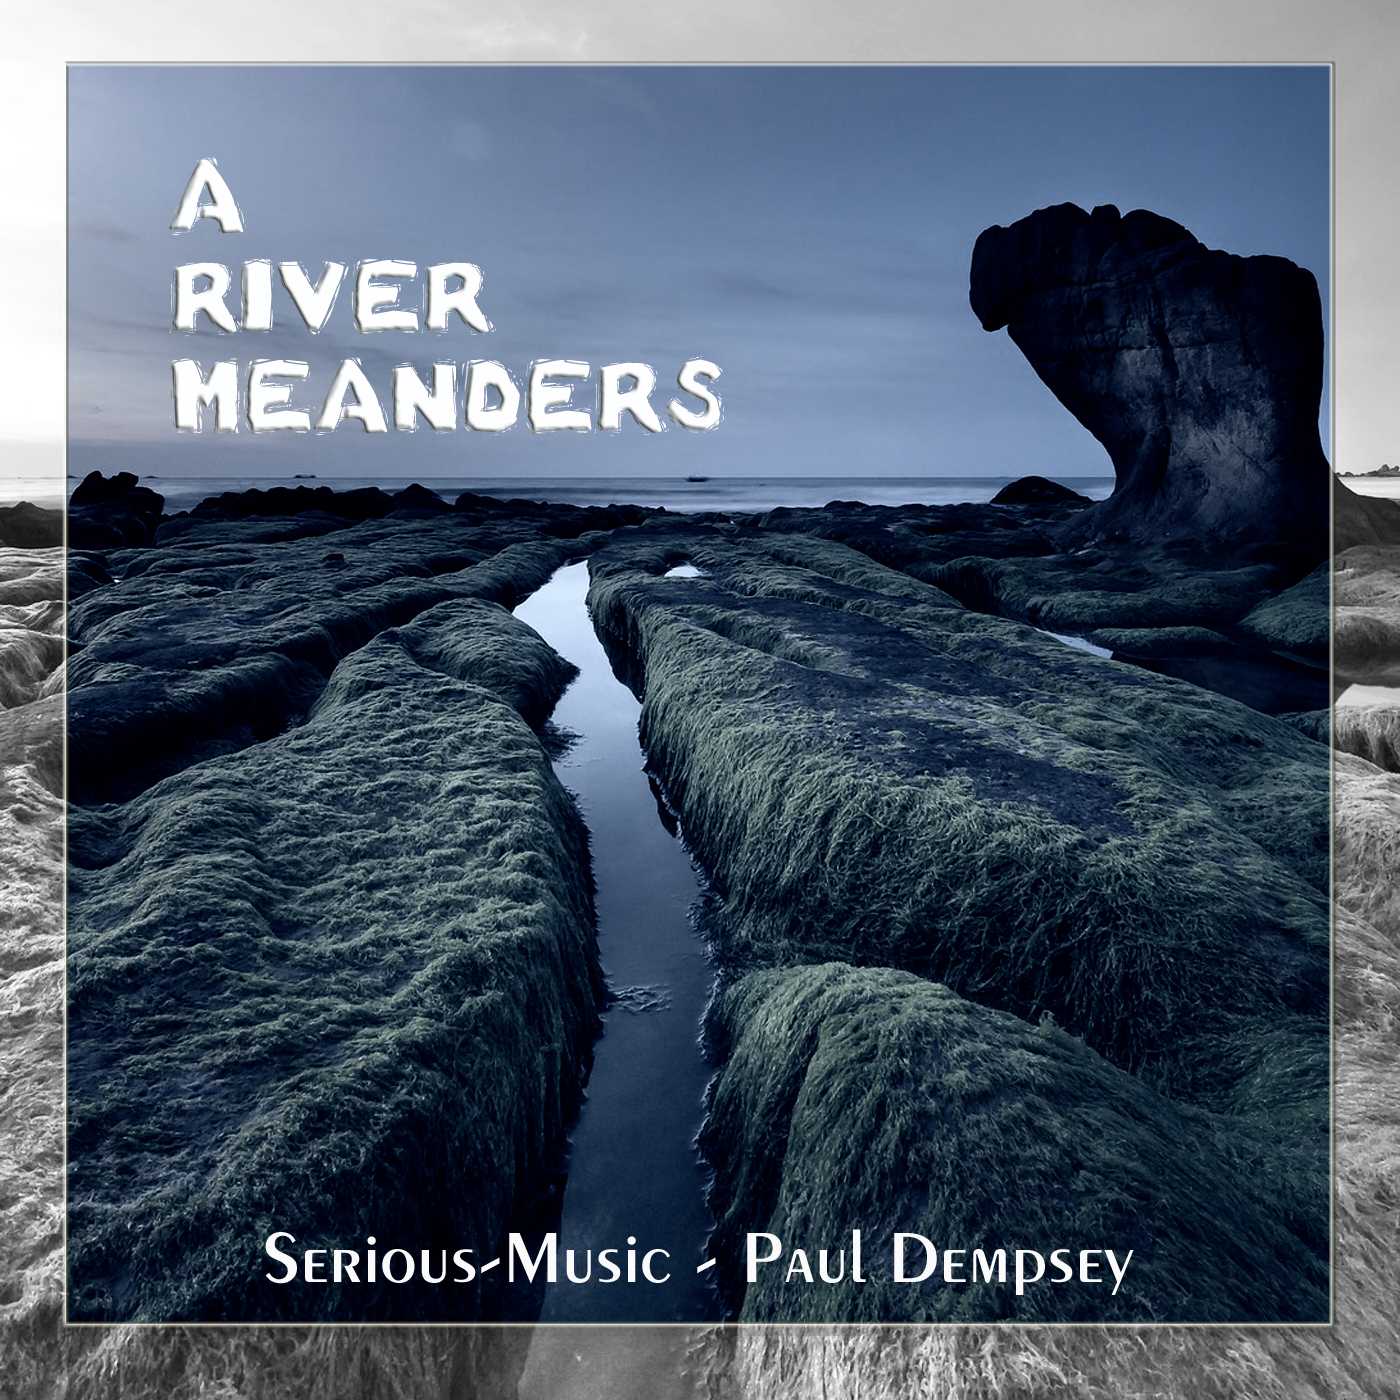 A River Meanders feat. Paul Dempsey - Album TRUTH